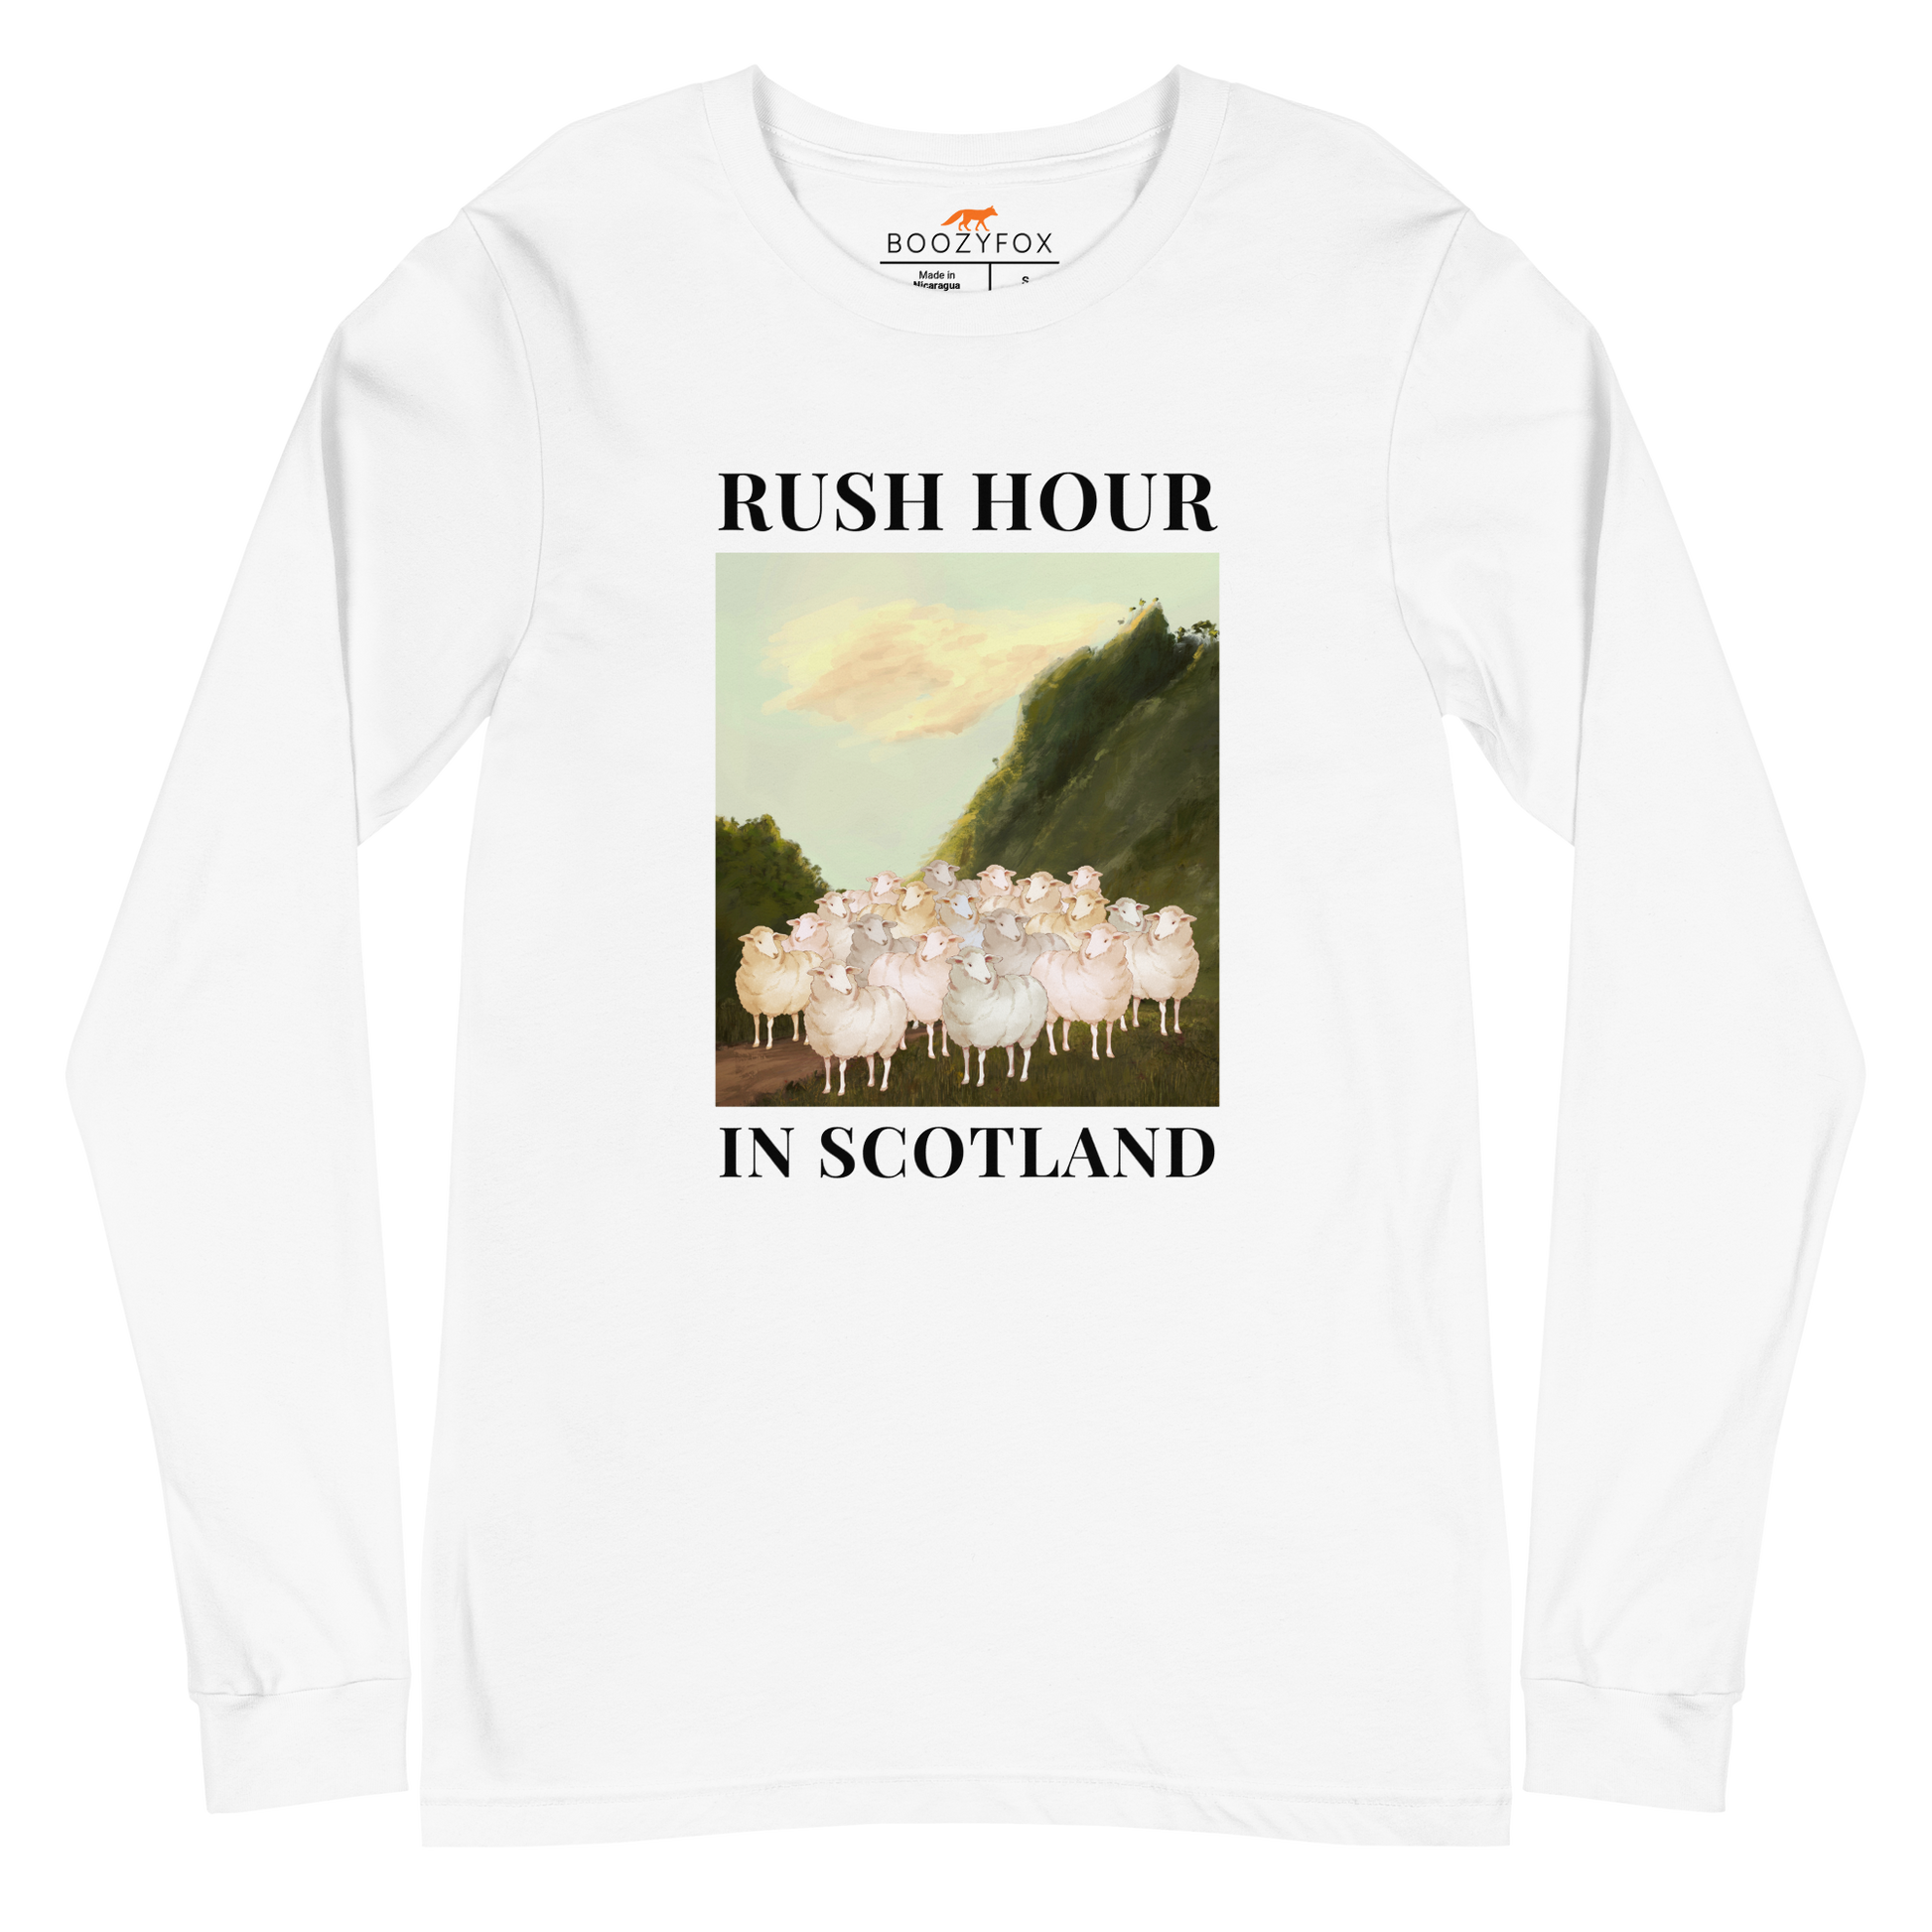 White Sheep Long Sleeve Tee featuring a comical Rush Hour In Scotland graphic on the chest - Artsy/Funny Sheep Long Sleeve Graphic Tees - Boozy Fox